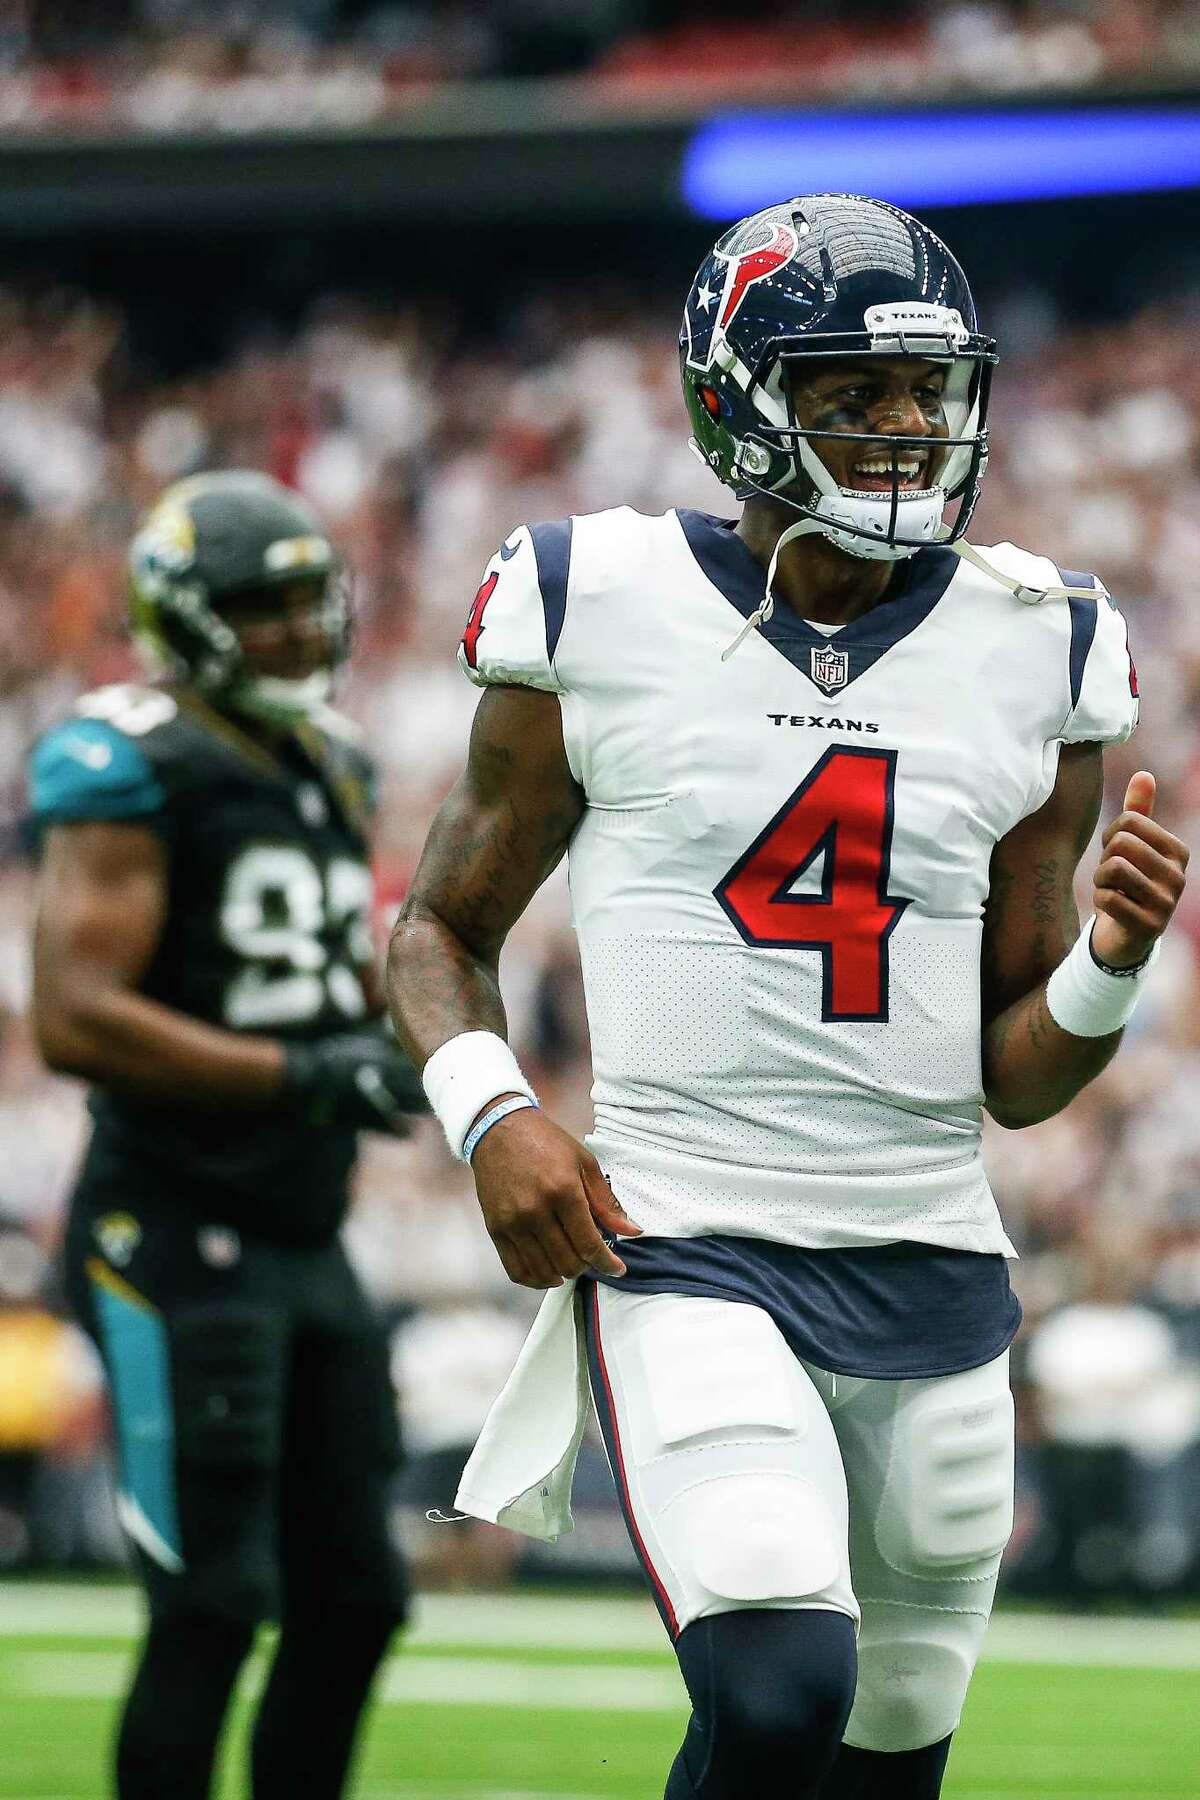 Houston Texans quarterback Deshaun Watson (4) reacts after throwing a touchdown pass in the second half as the Houston Texans lose to the Jacksonville Jaguars 29-7 at NRG Stadium Sunday, Sept. 10, 2017 in Houston. ( Michael Ciaglo / Houston Chronicle)